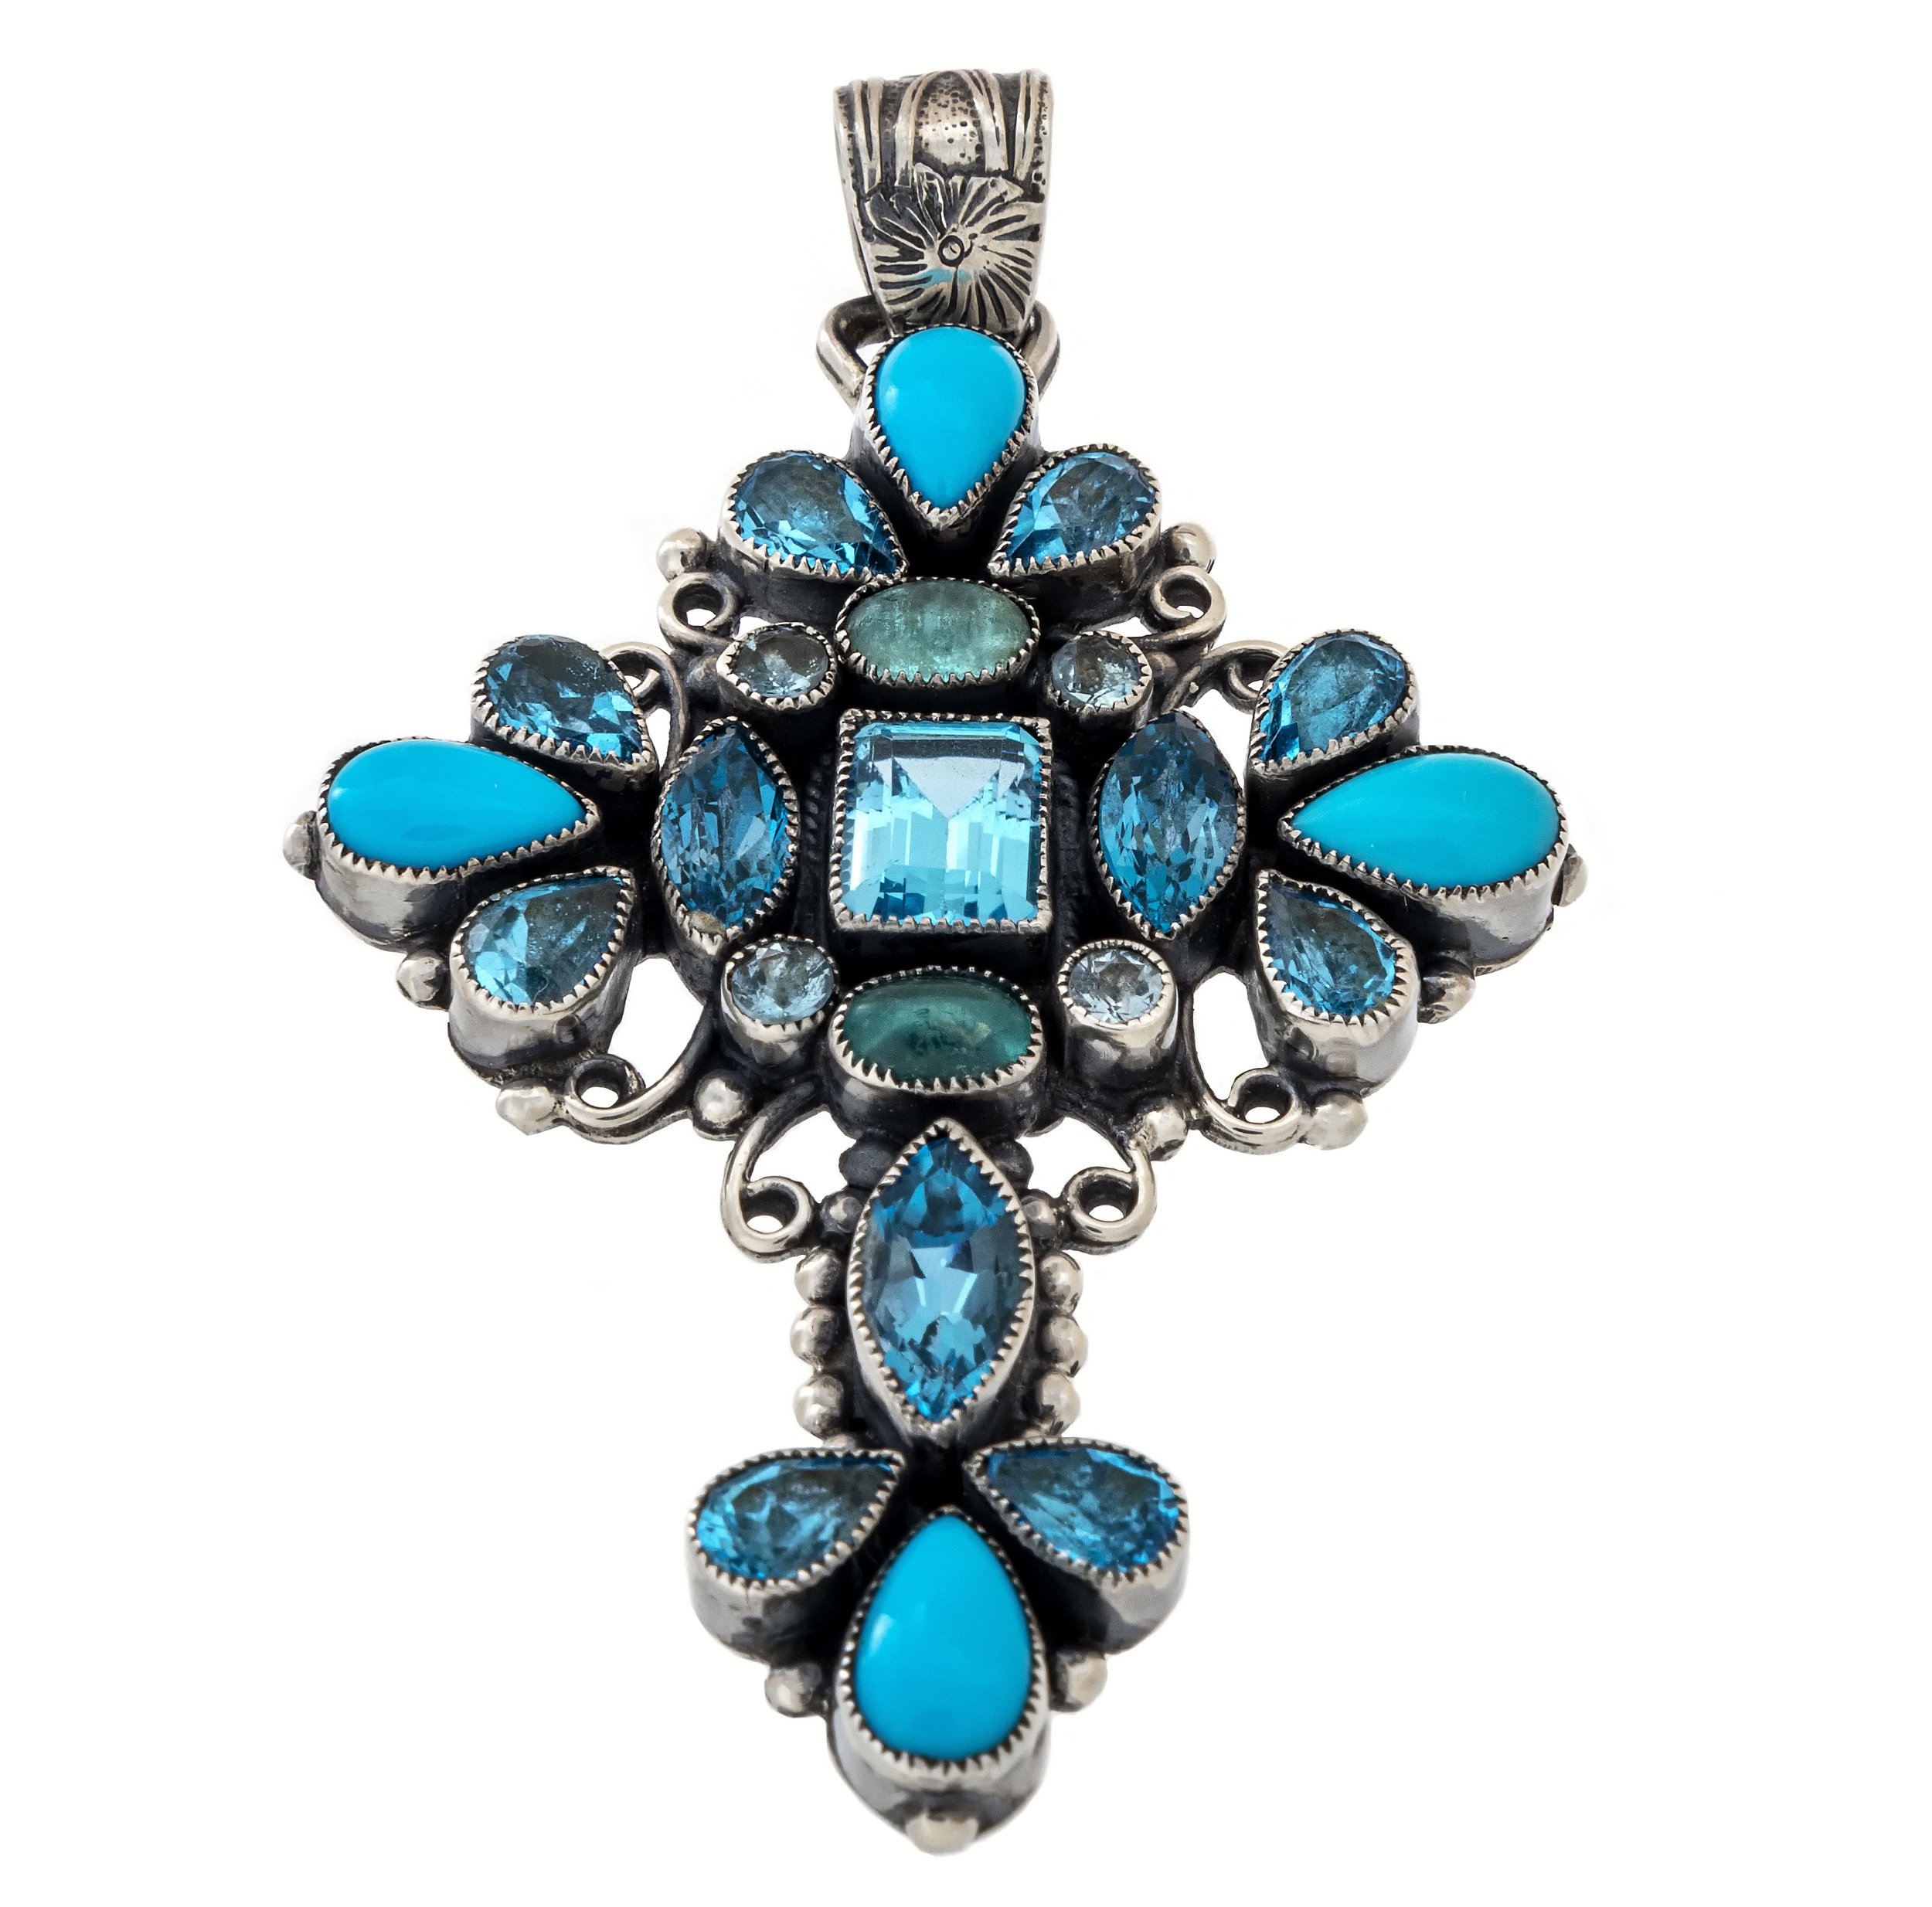 Blue Topaz & Turquoise Cross Pendant With Silver Beading & Wiring With Flower Stamped Bail